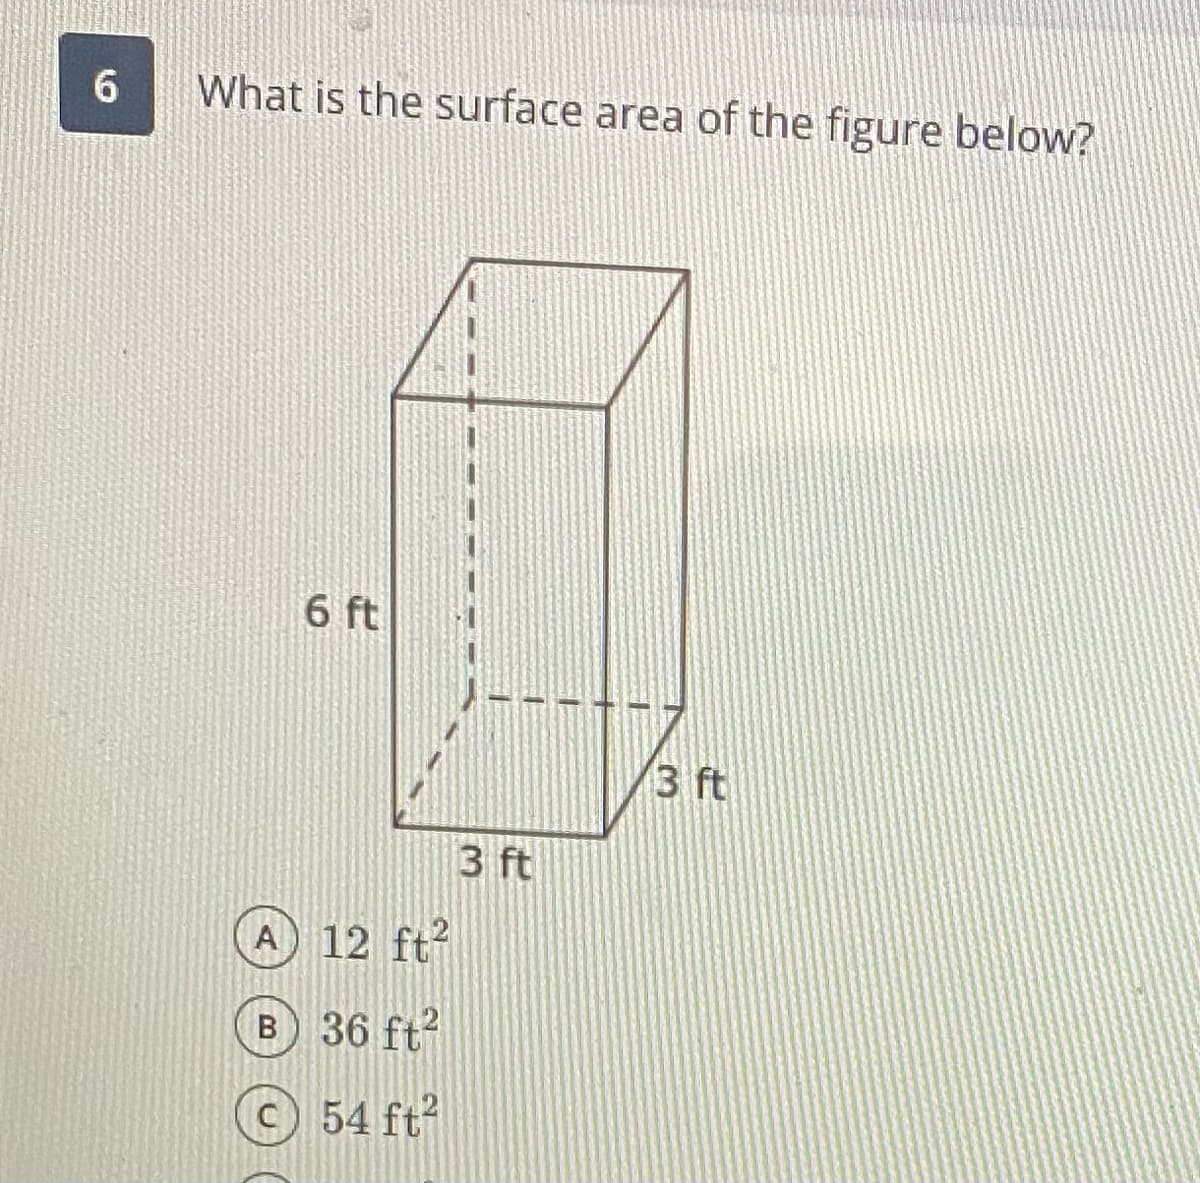 What is the surface area of the figure below?
6 ft
3 ft
3 ft
A 12 ft?
в 36 ft?
C54 ft?
